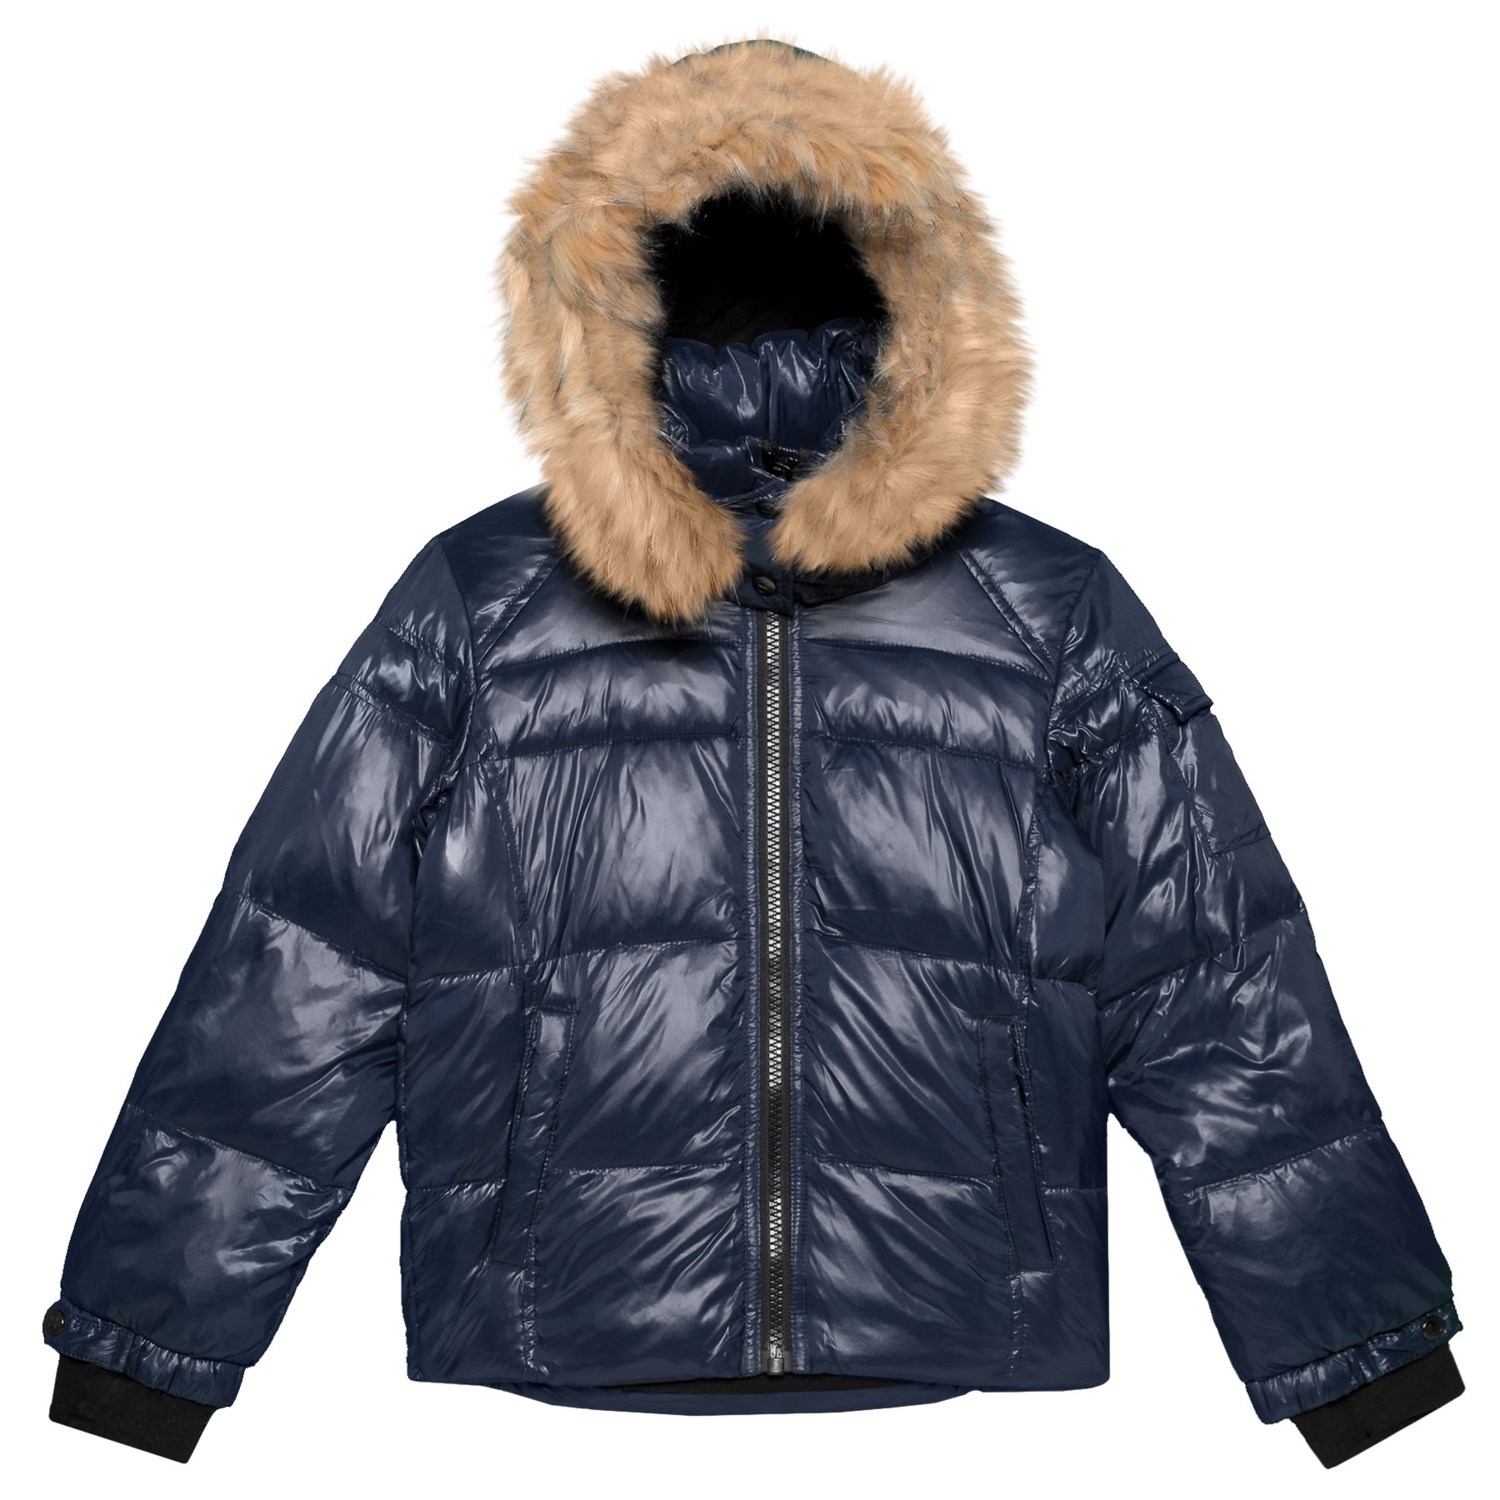 S13/NYC Faux-Fur Downhill Down Jacket – Insulated (For Big Boys)